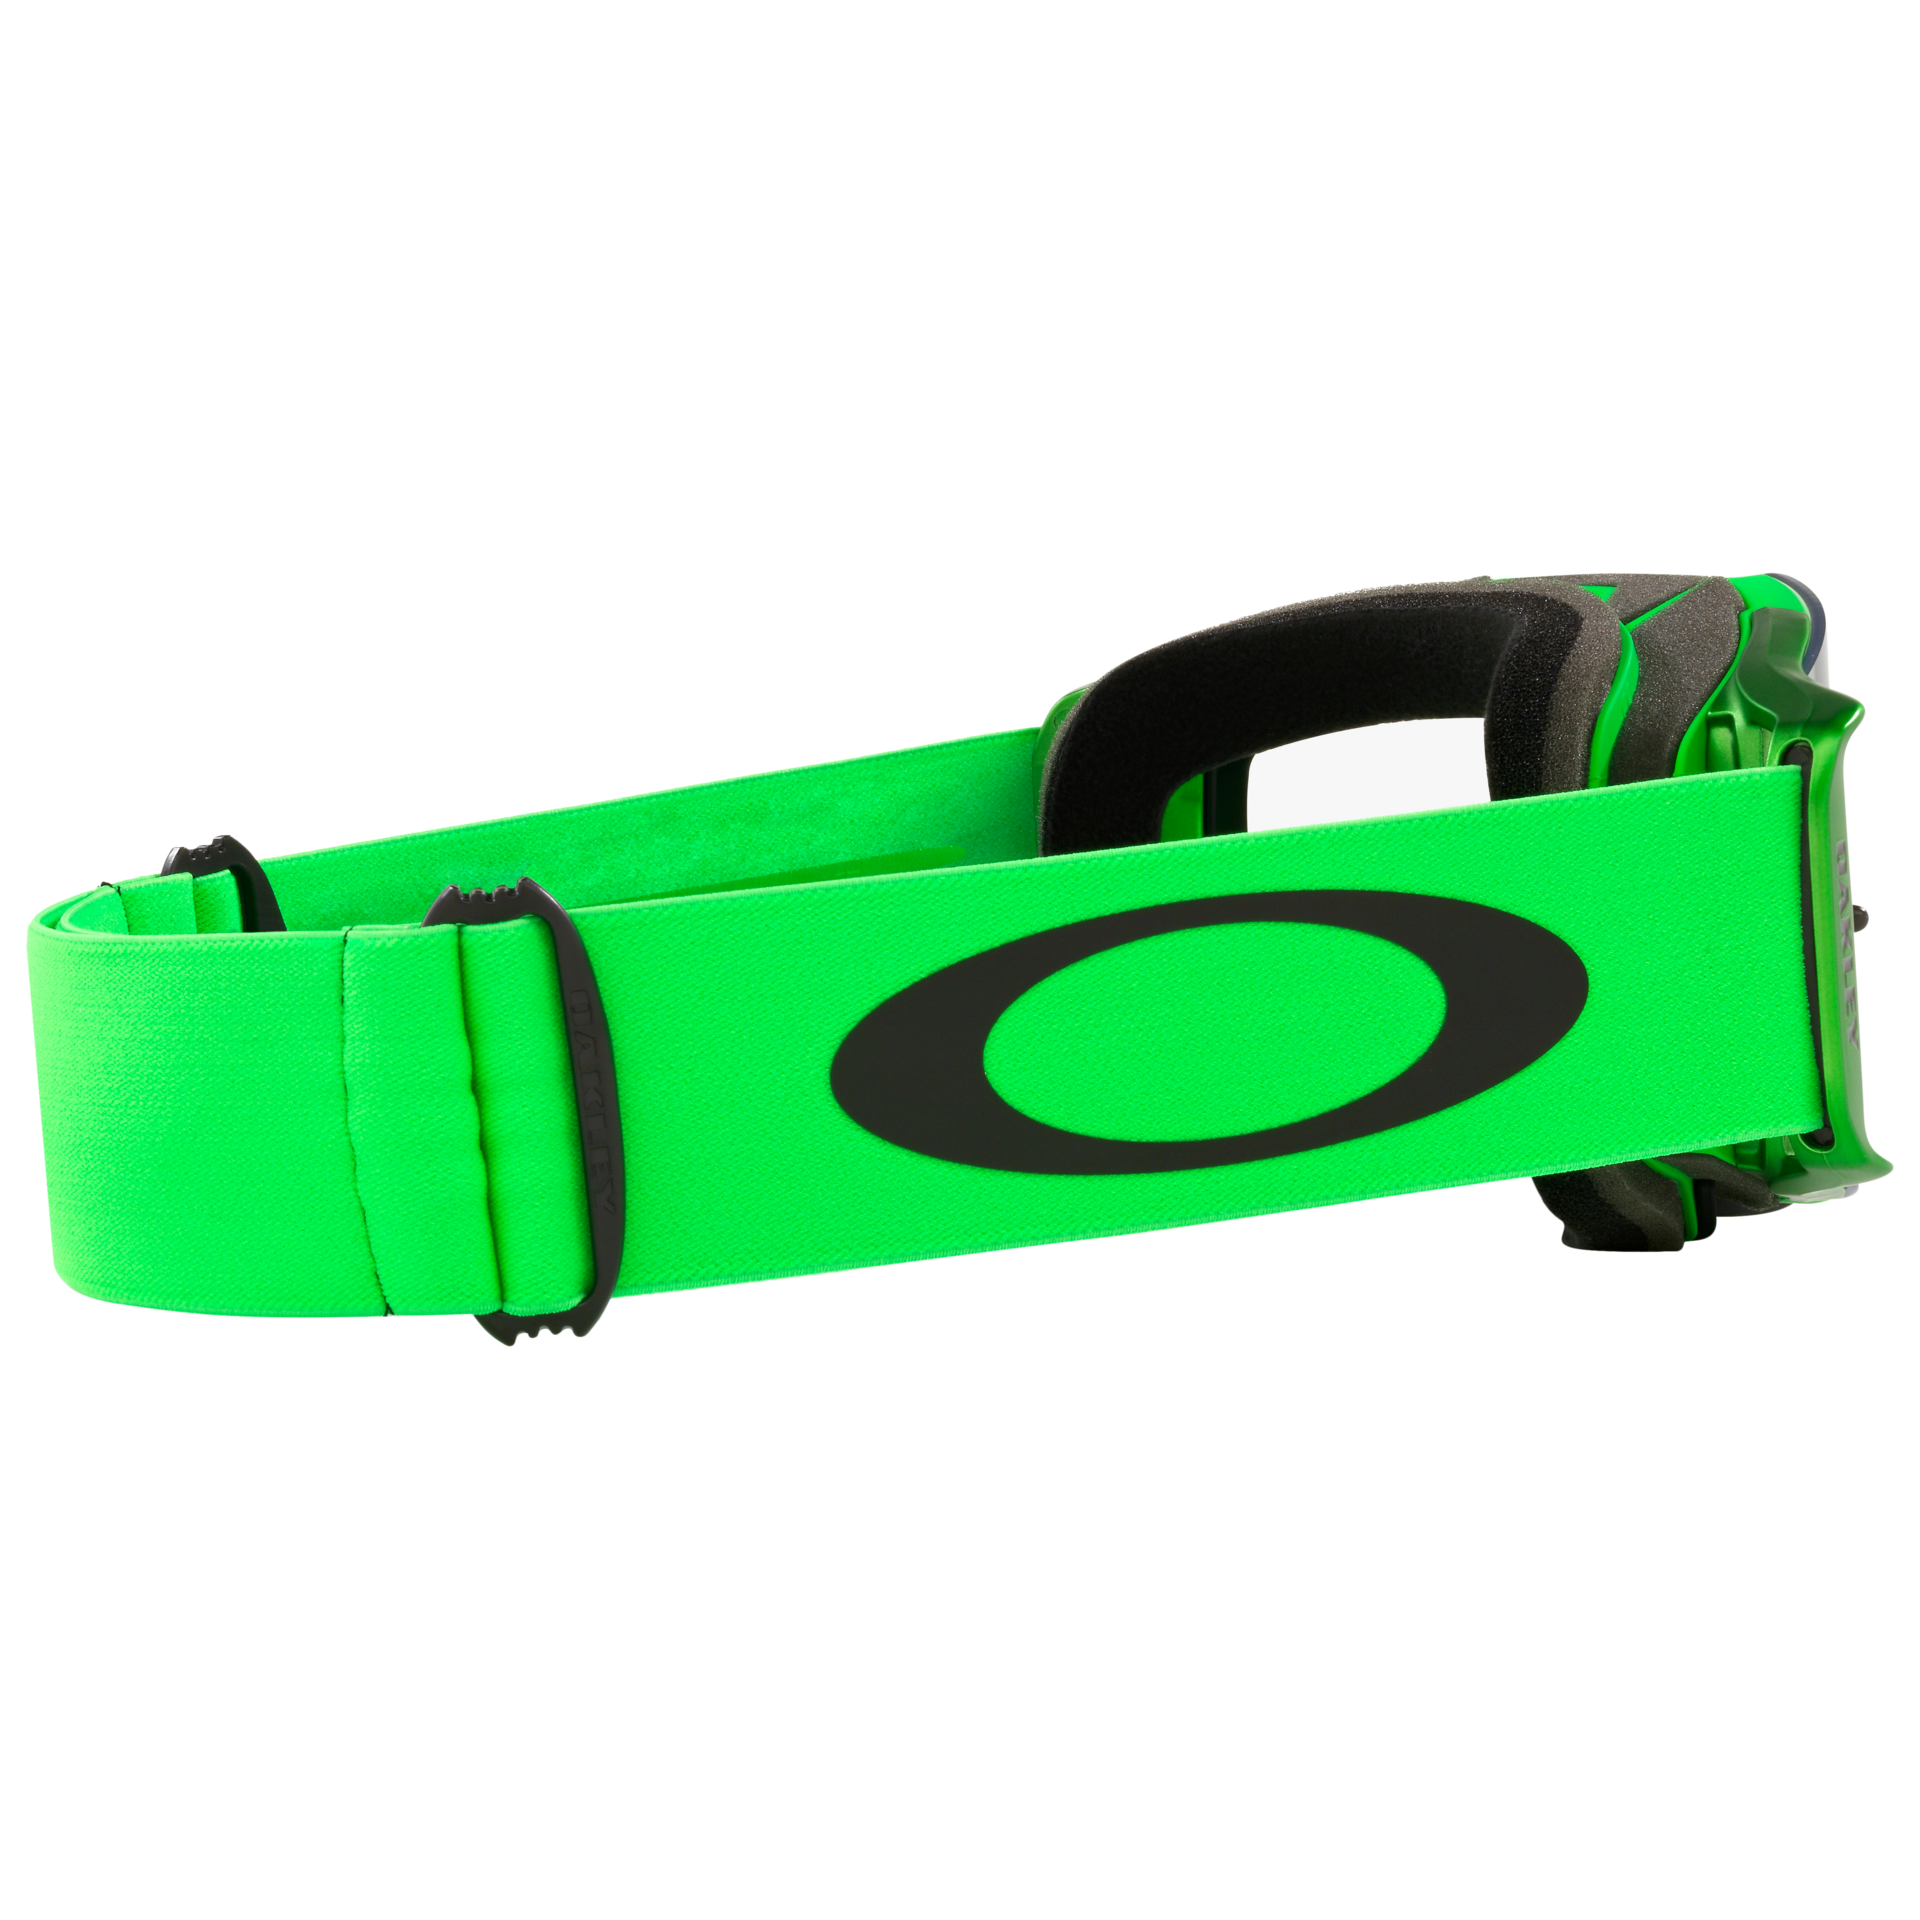 Oakley Front Line MX Goggle Moto Green - Clear Lens